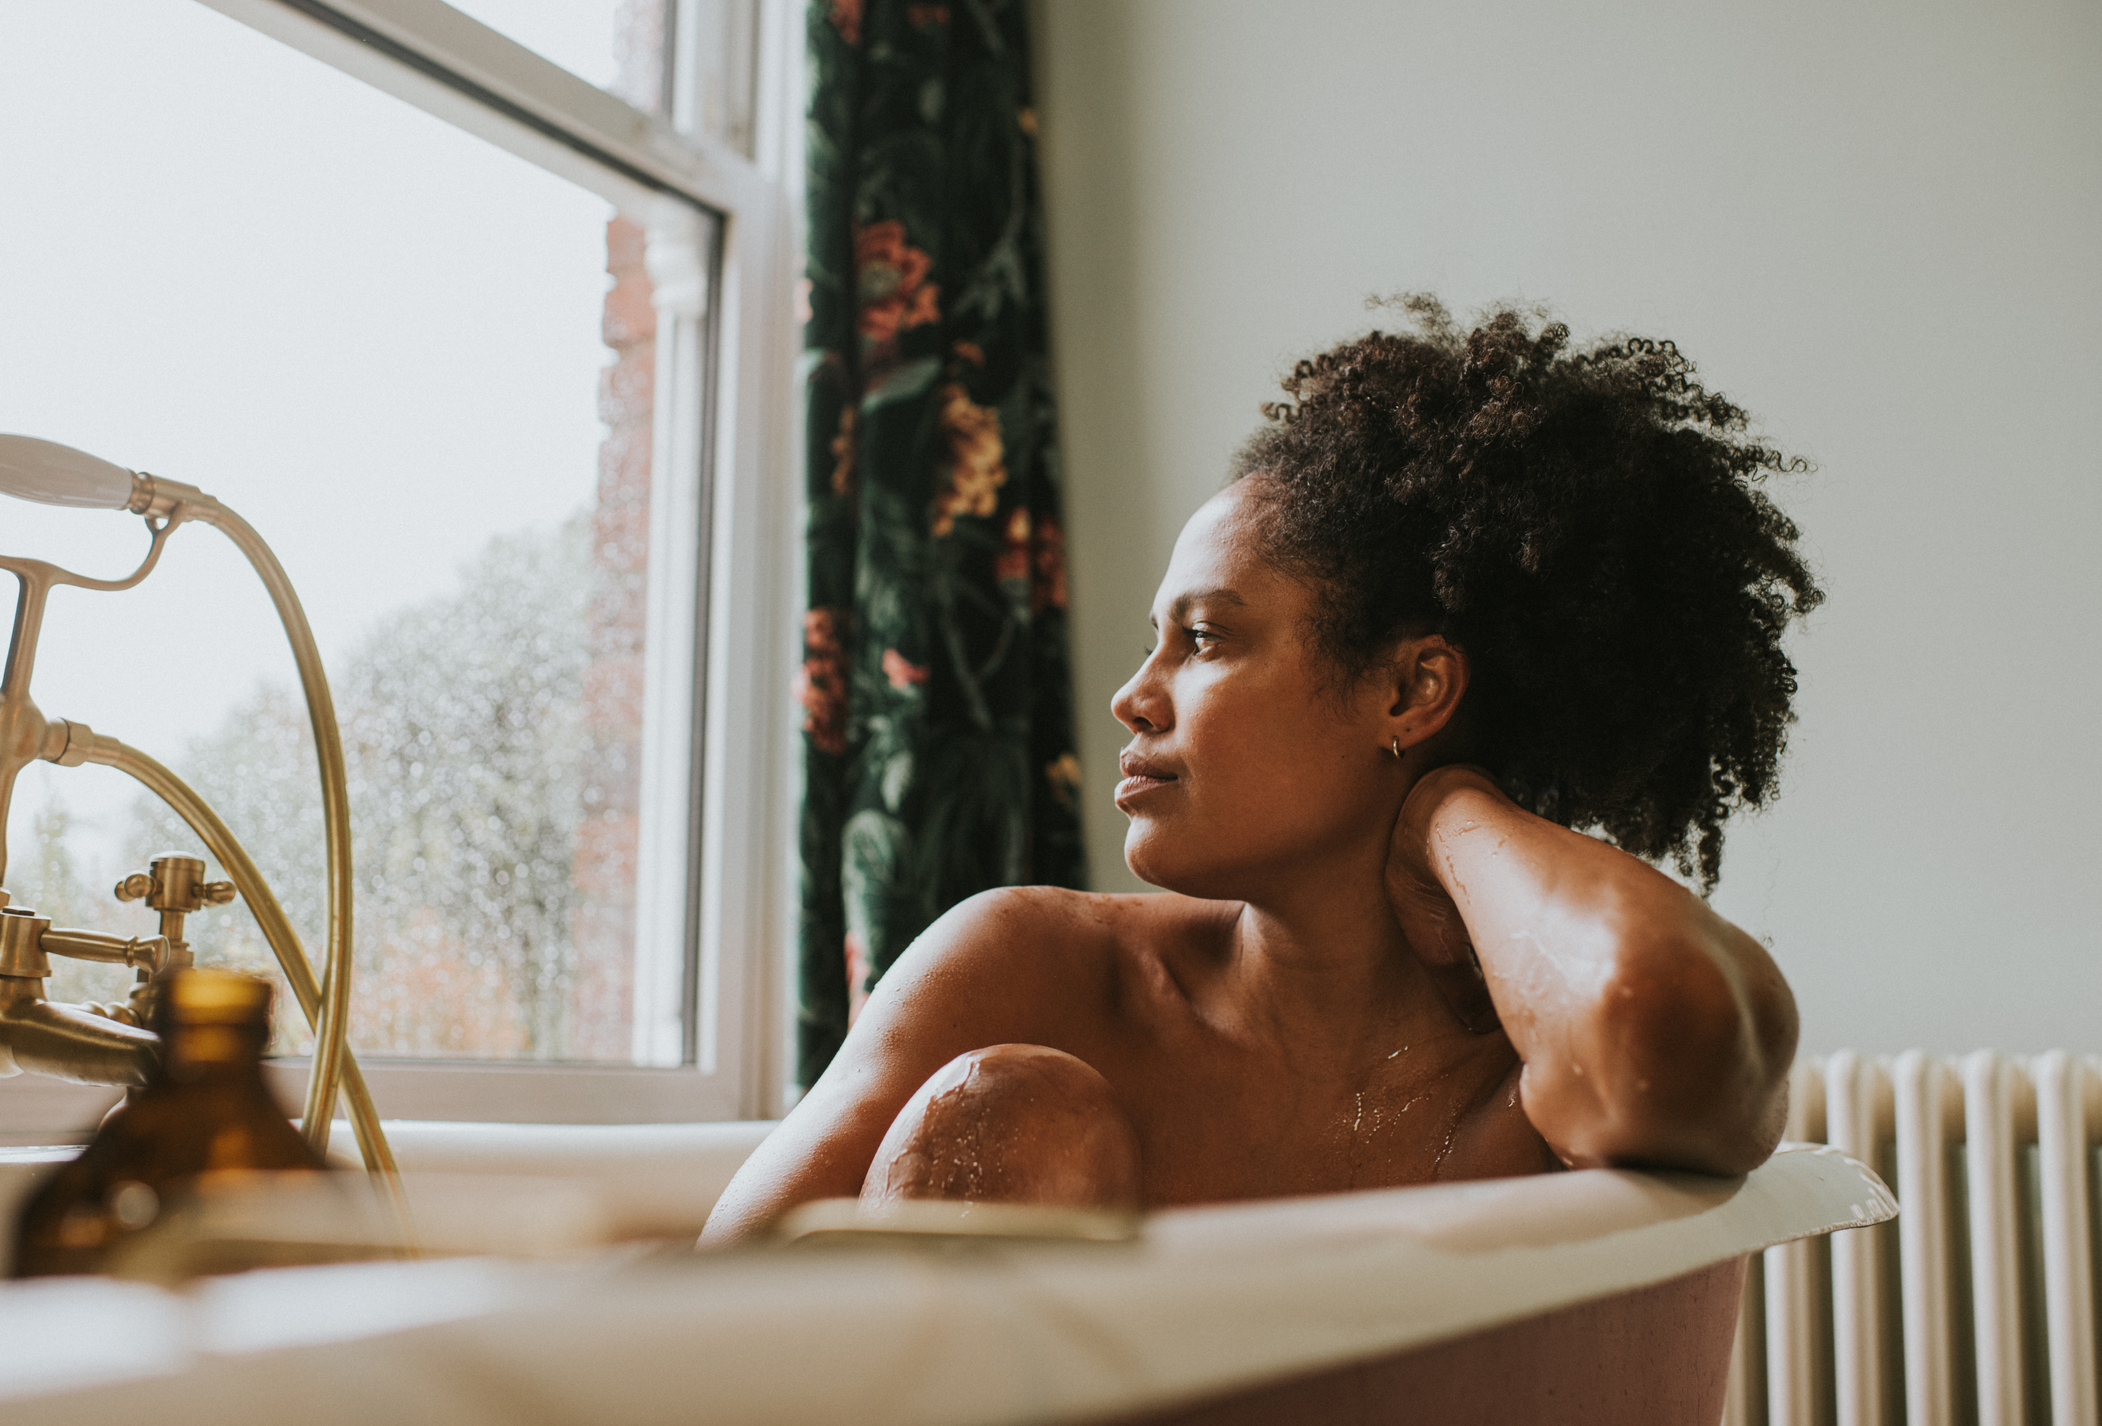 A Black woman bathes in a roll top bath, she seems distracted as she rests her head on her arm and gazes out the window